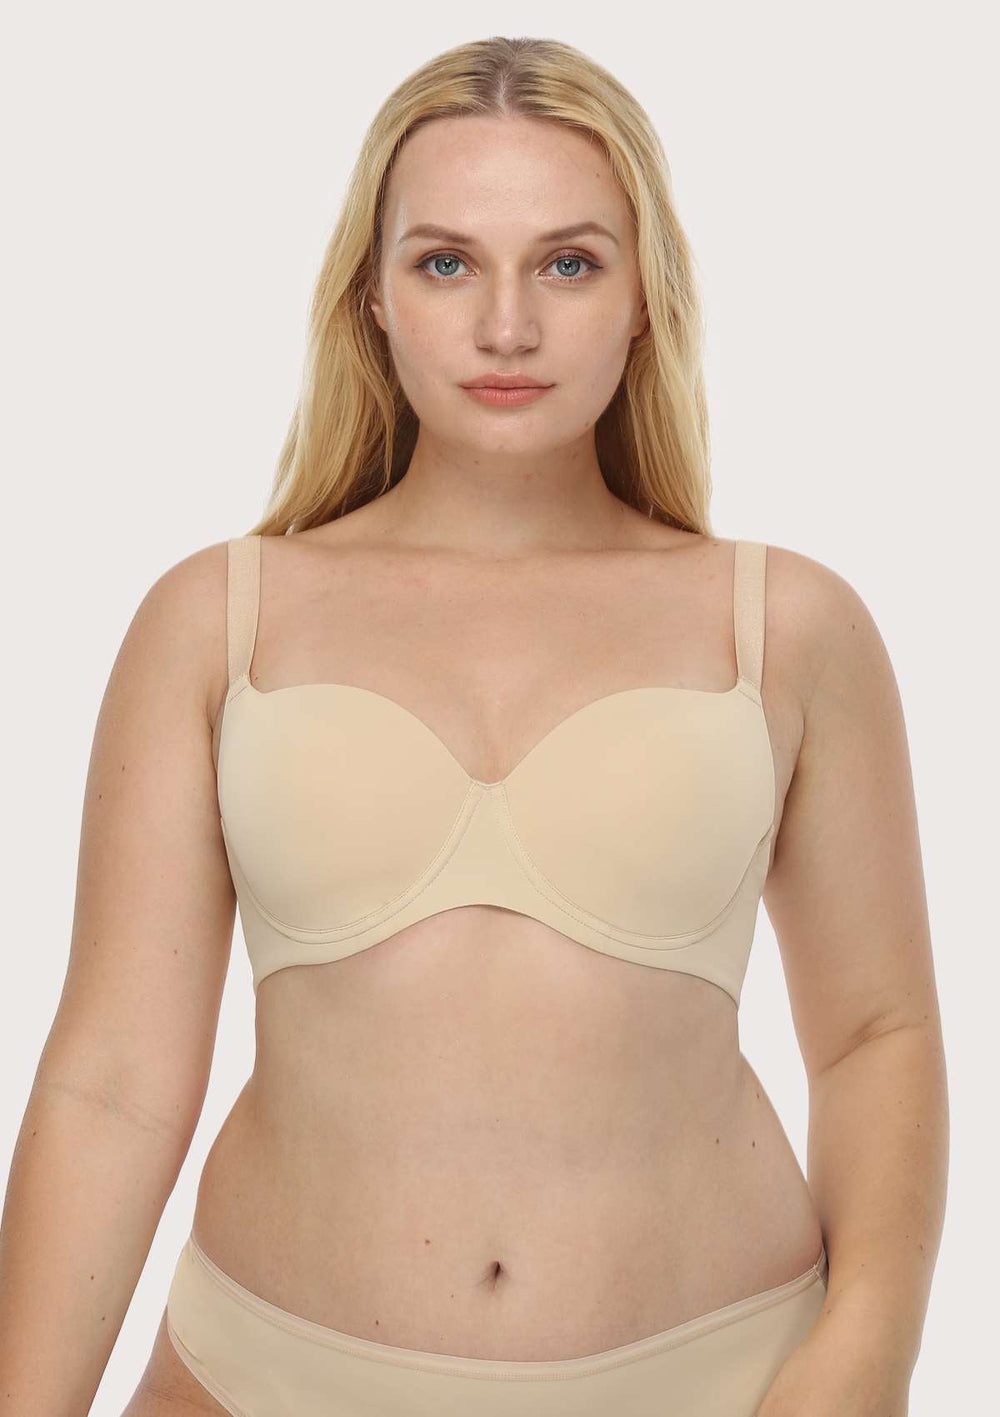 OVTICZA Bras for Women Padded T-Shirt Bra Complexion 40F 